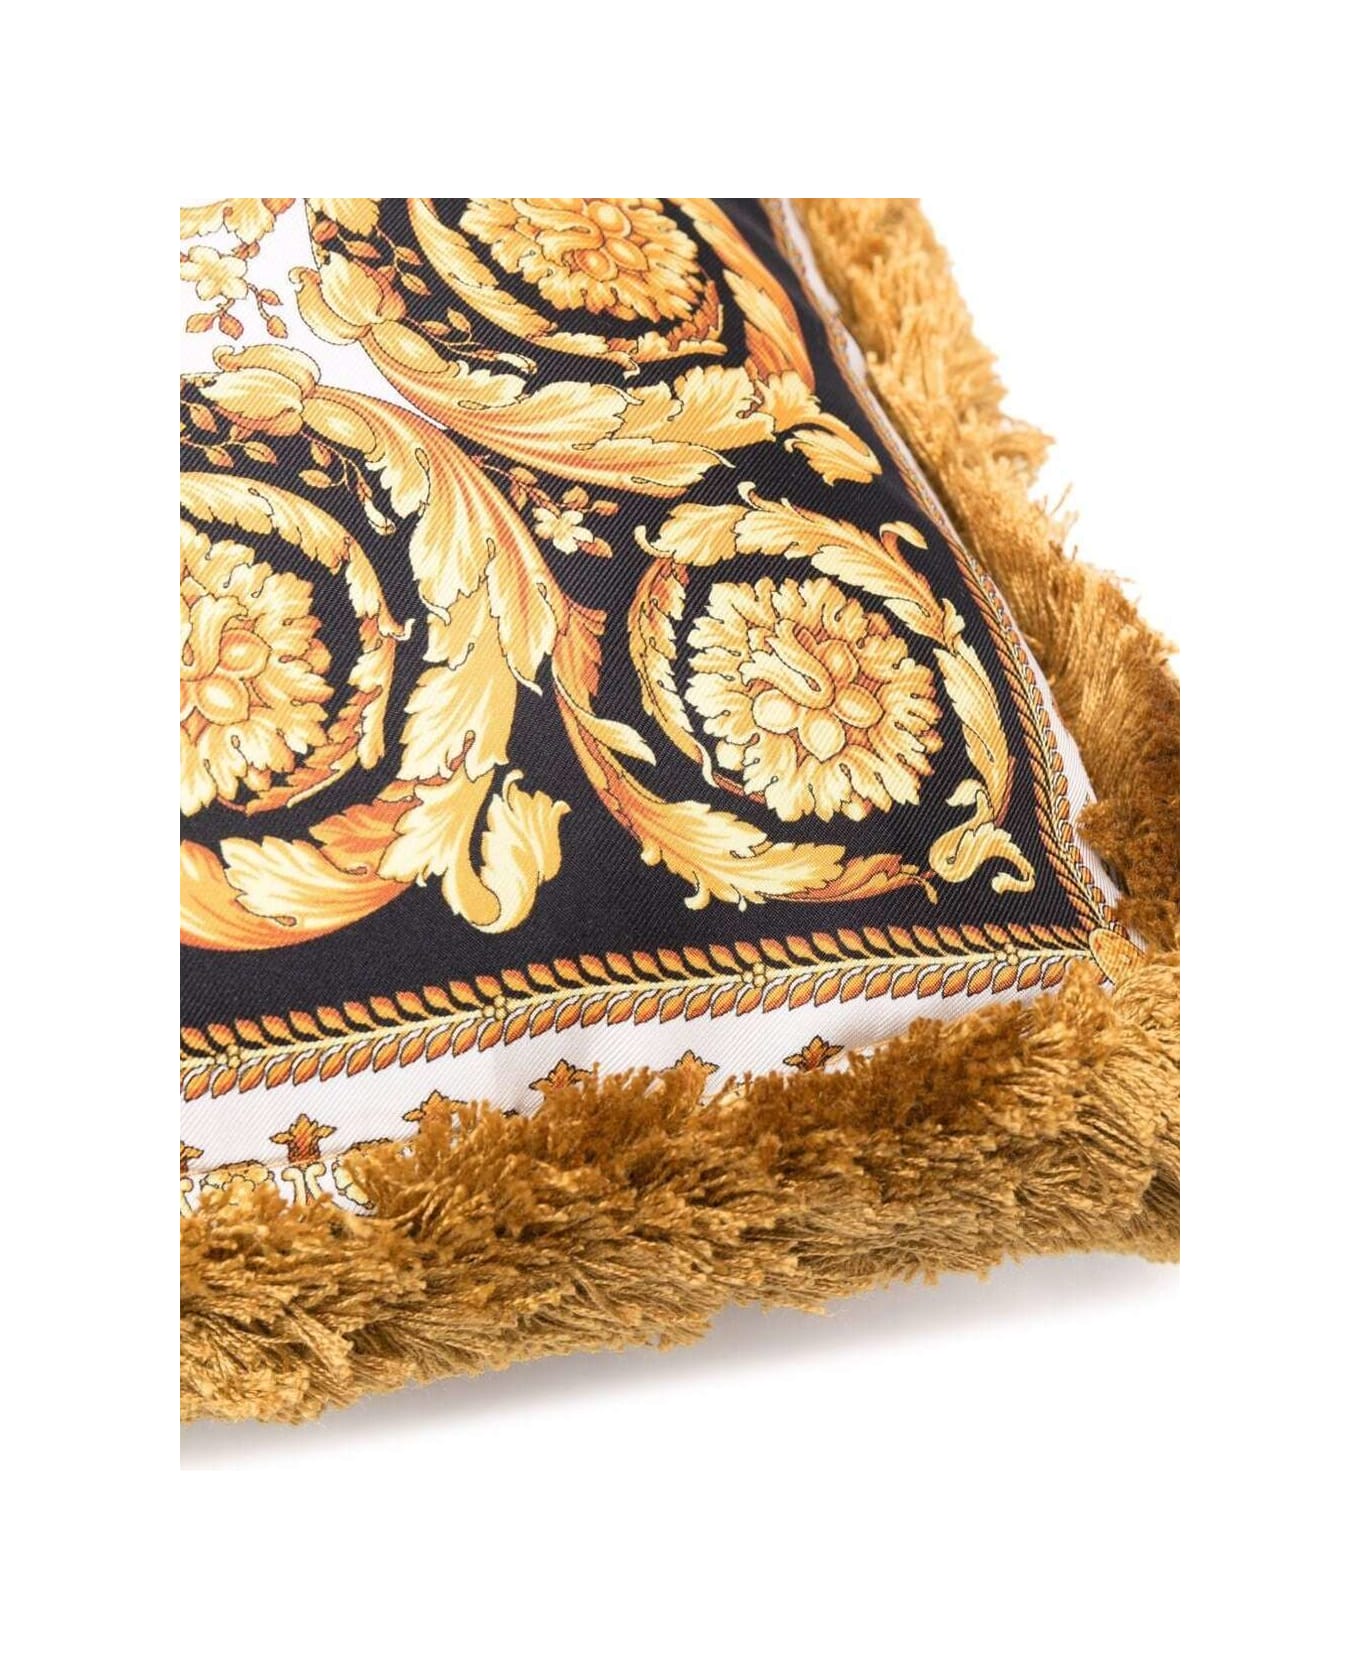 Versace Gold, Black And White Pillow  In Silk And Synthetic Fibers With Baroque Print - Black